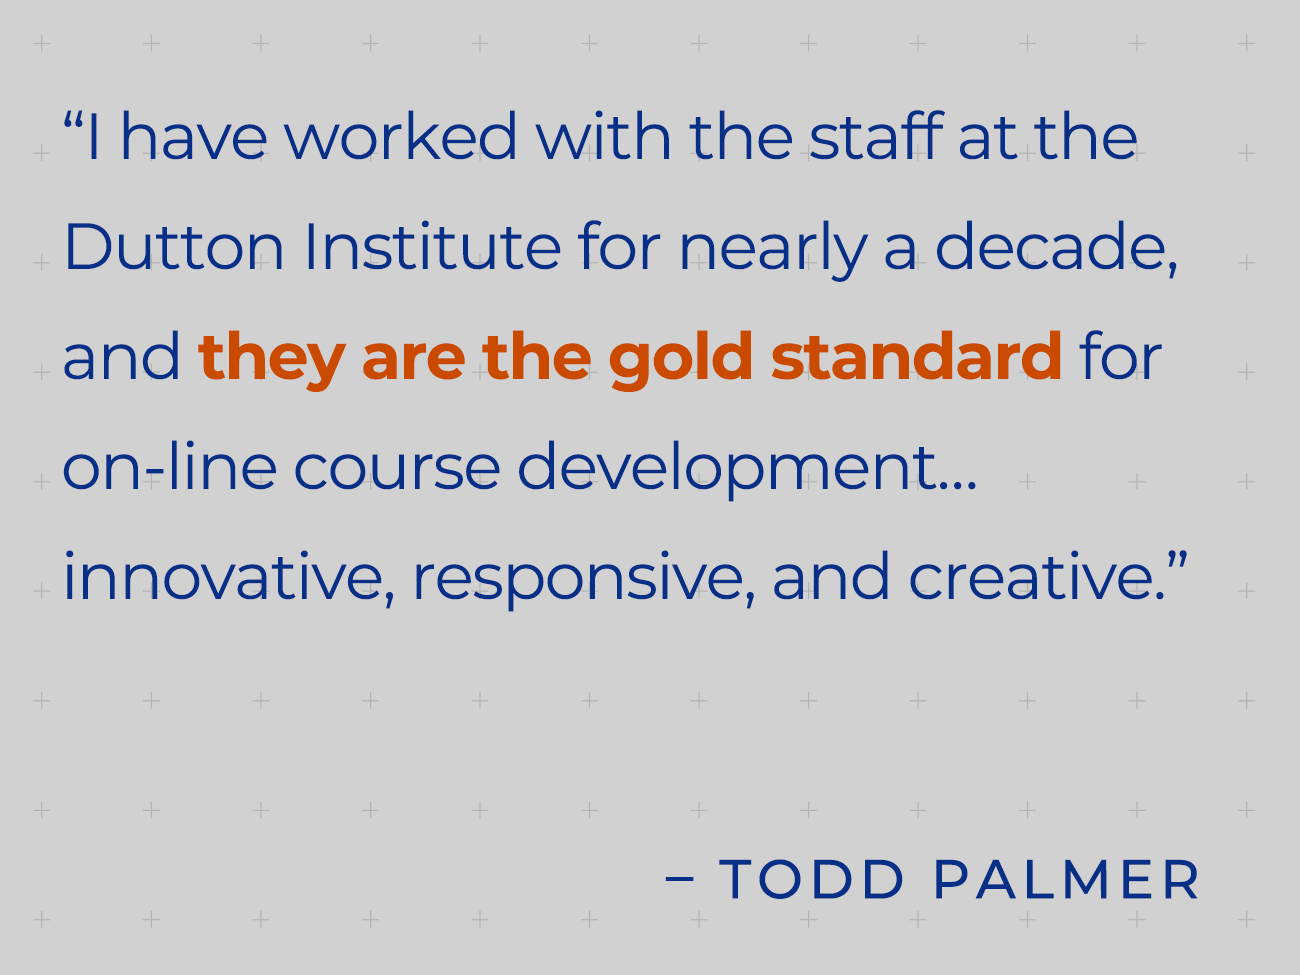 I have worked with the staff at the Dutton Institute for nearly a decade, and they are the gold standard for online course development….innovative, responsive, and creative. - Todd Palmer quote